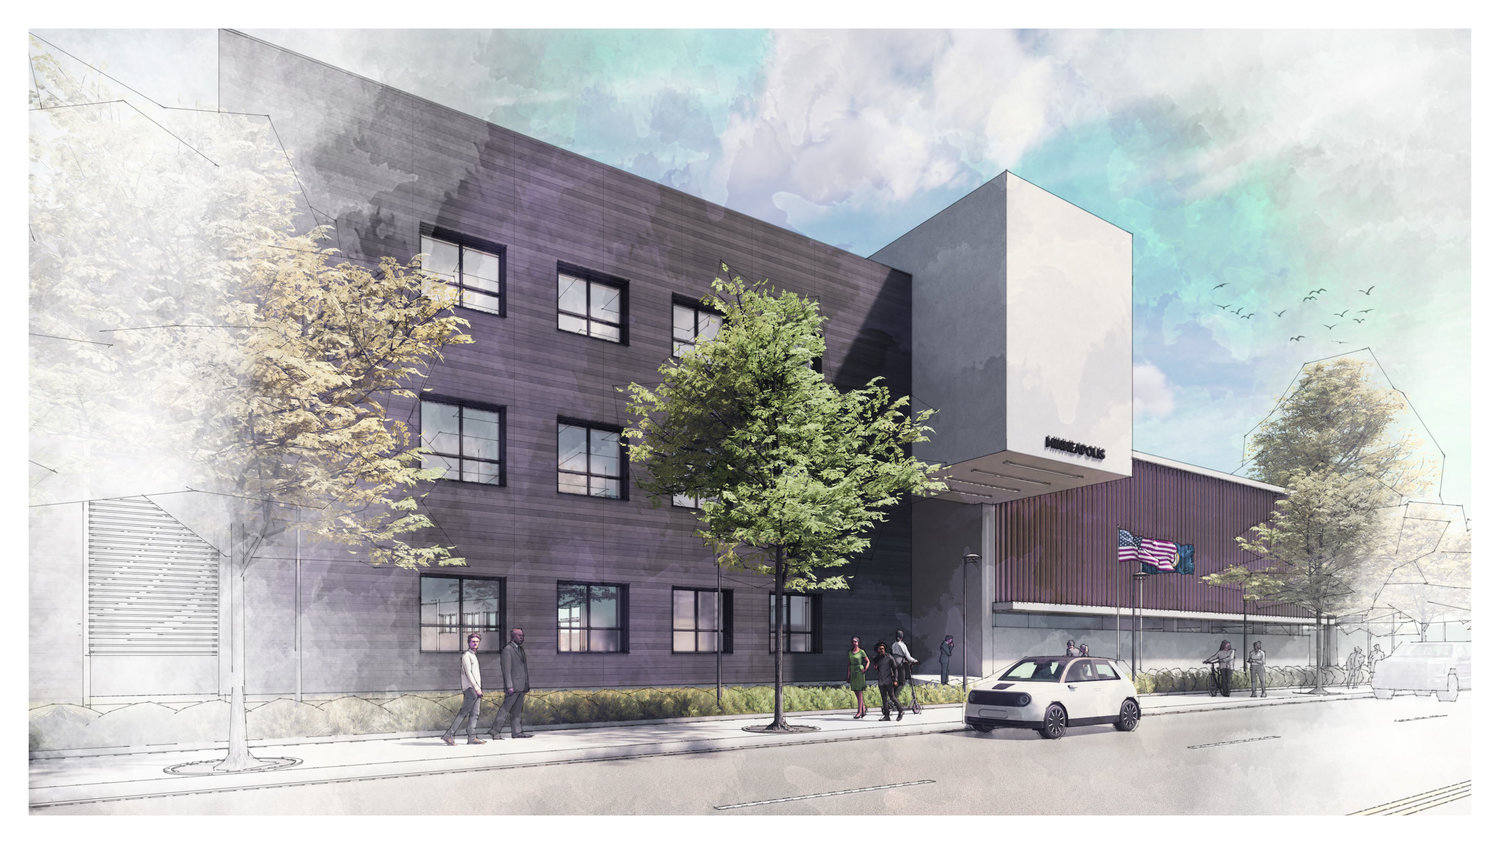 Potential redesign of 3000 Minnehaha Ave. 3rd Precinct building. According to the city website, "They're meant to help with conversations about potential locations. The renderings are not final designs. Future decisions will inform the final building design."